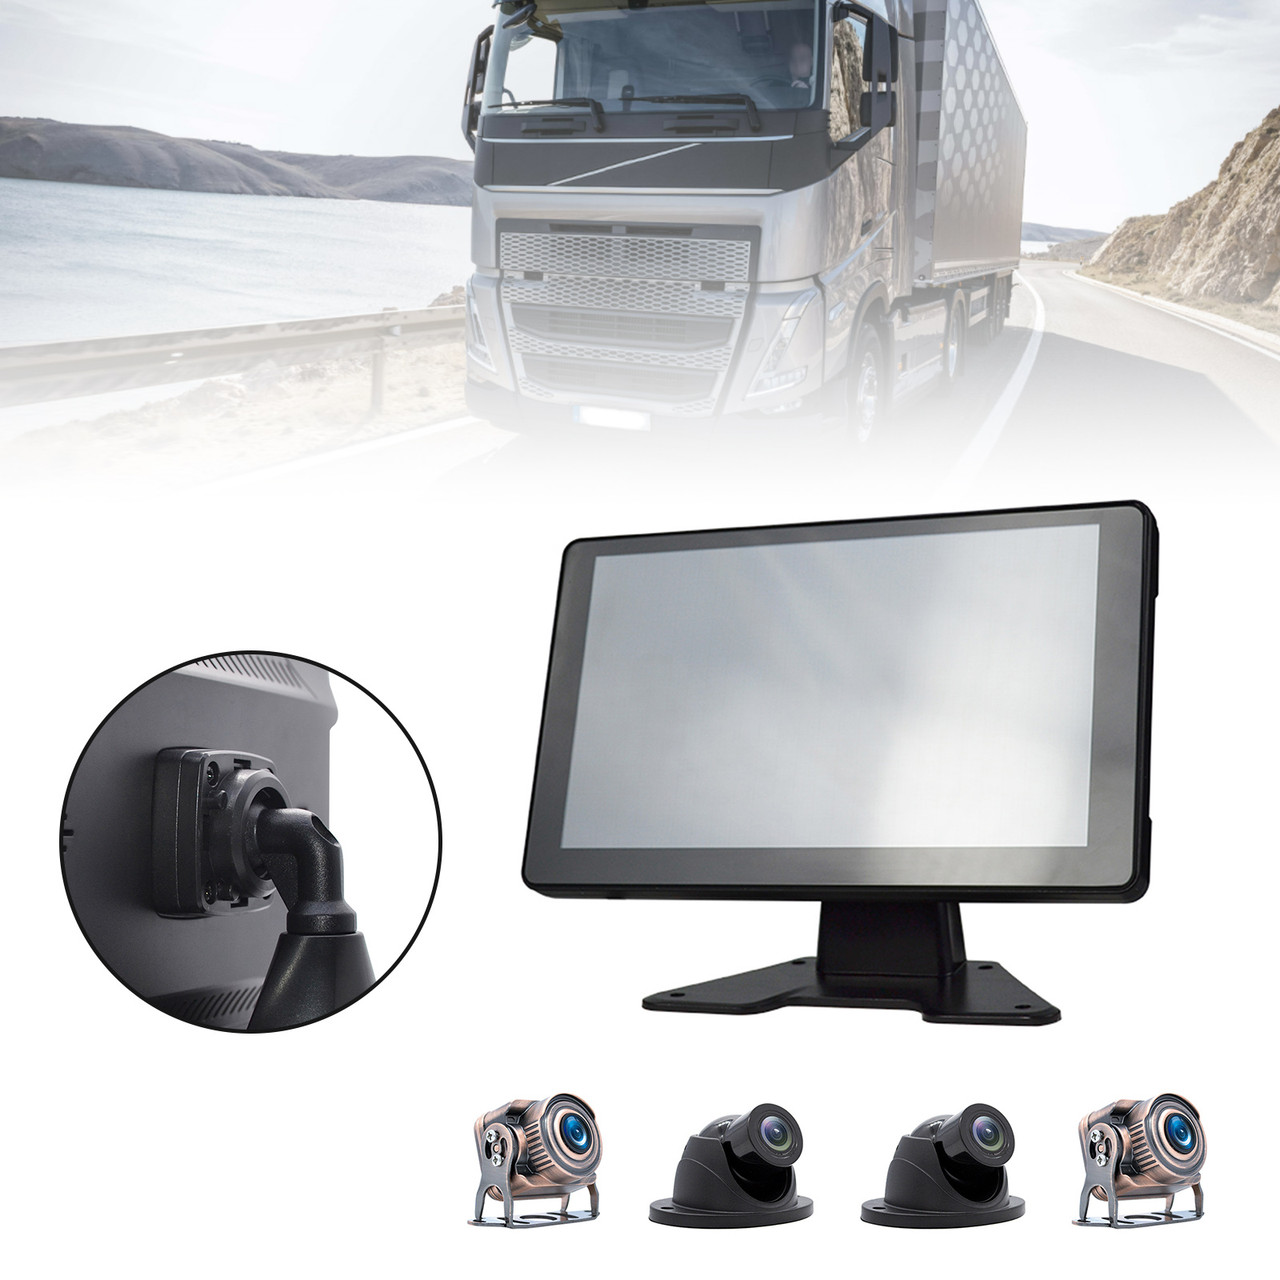 9" Monitor DVR Driving Video Recorder Touch Screen for RV Truck Bus + 4 Camera